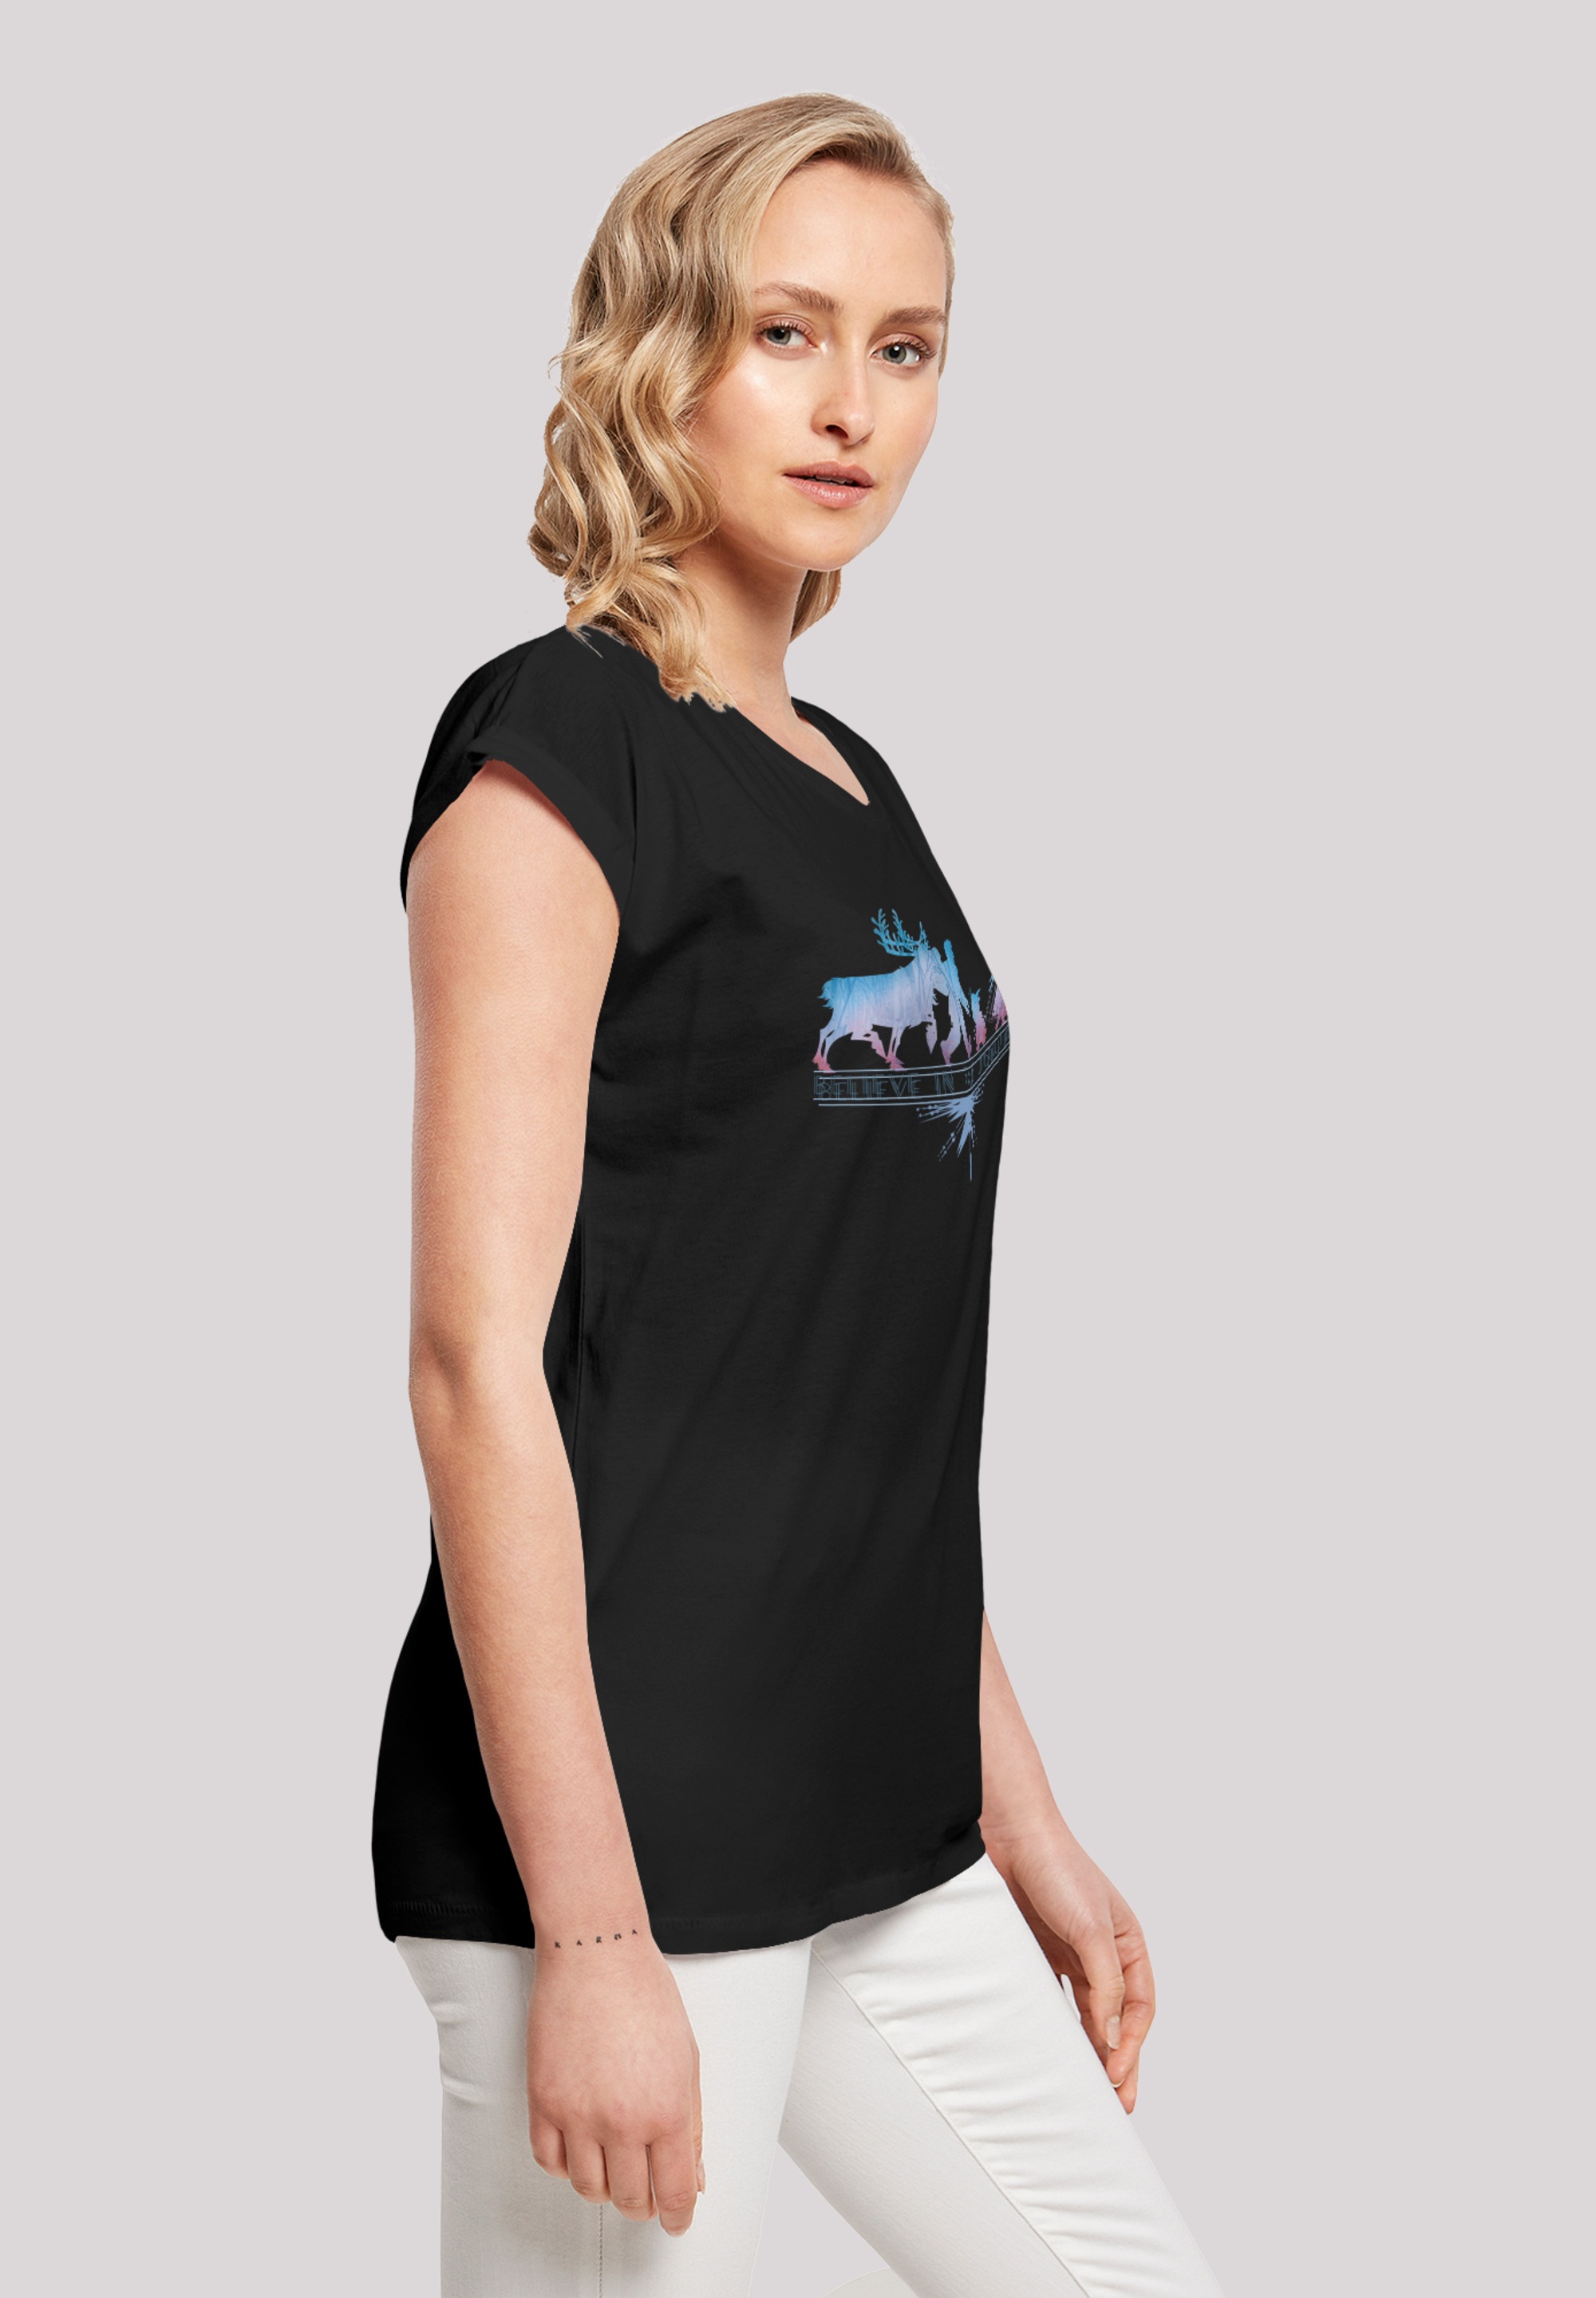 Believe F4NT4STIC T-Shirt In BAUR Black 2 The Print »Frozen Journey\'«, | Friday